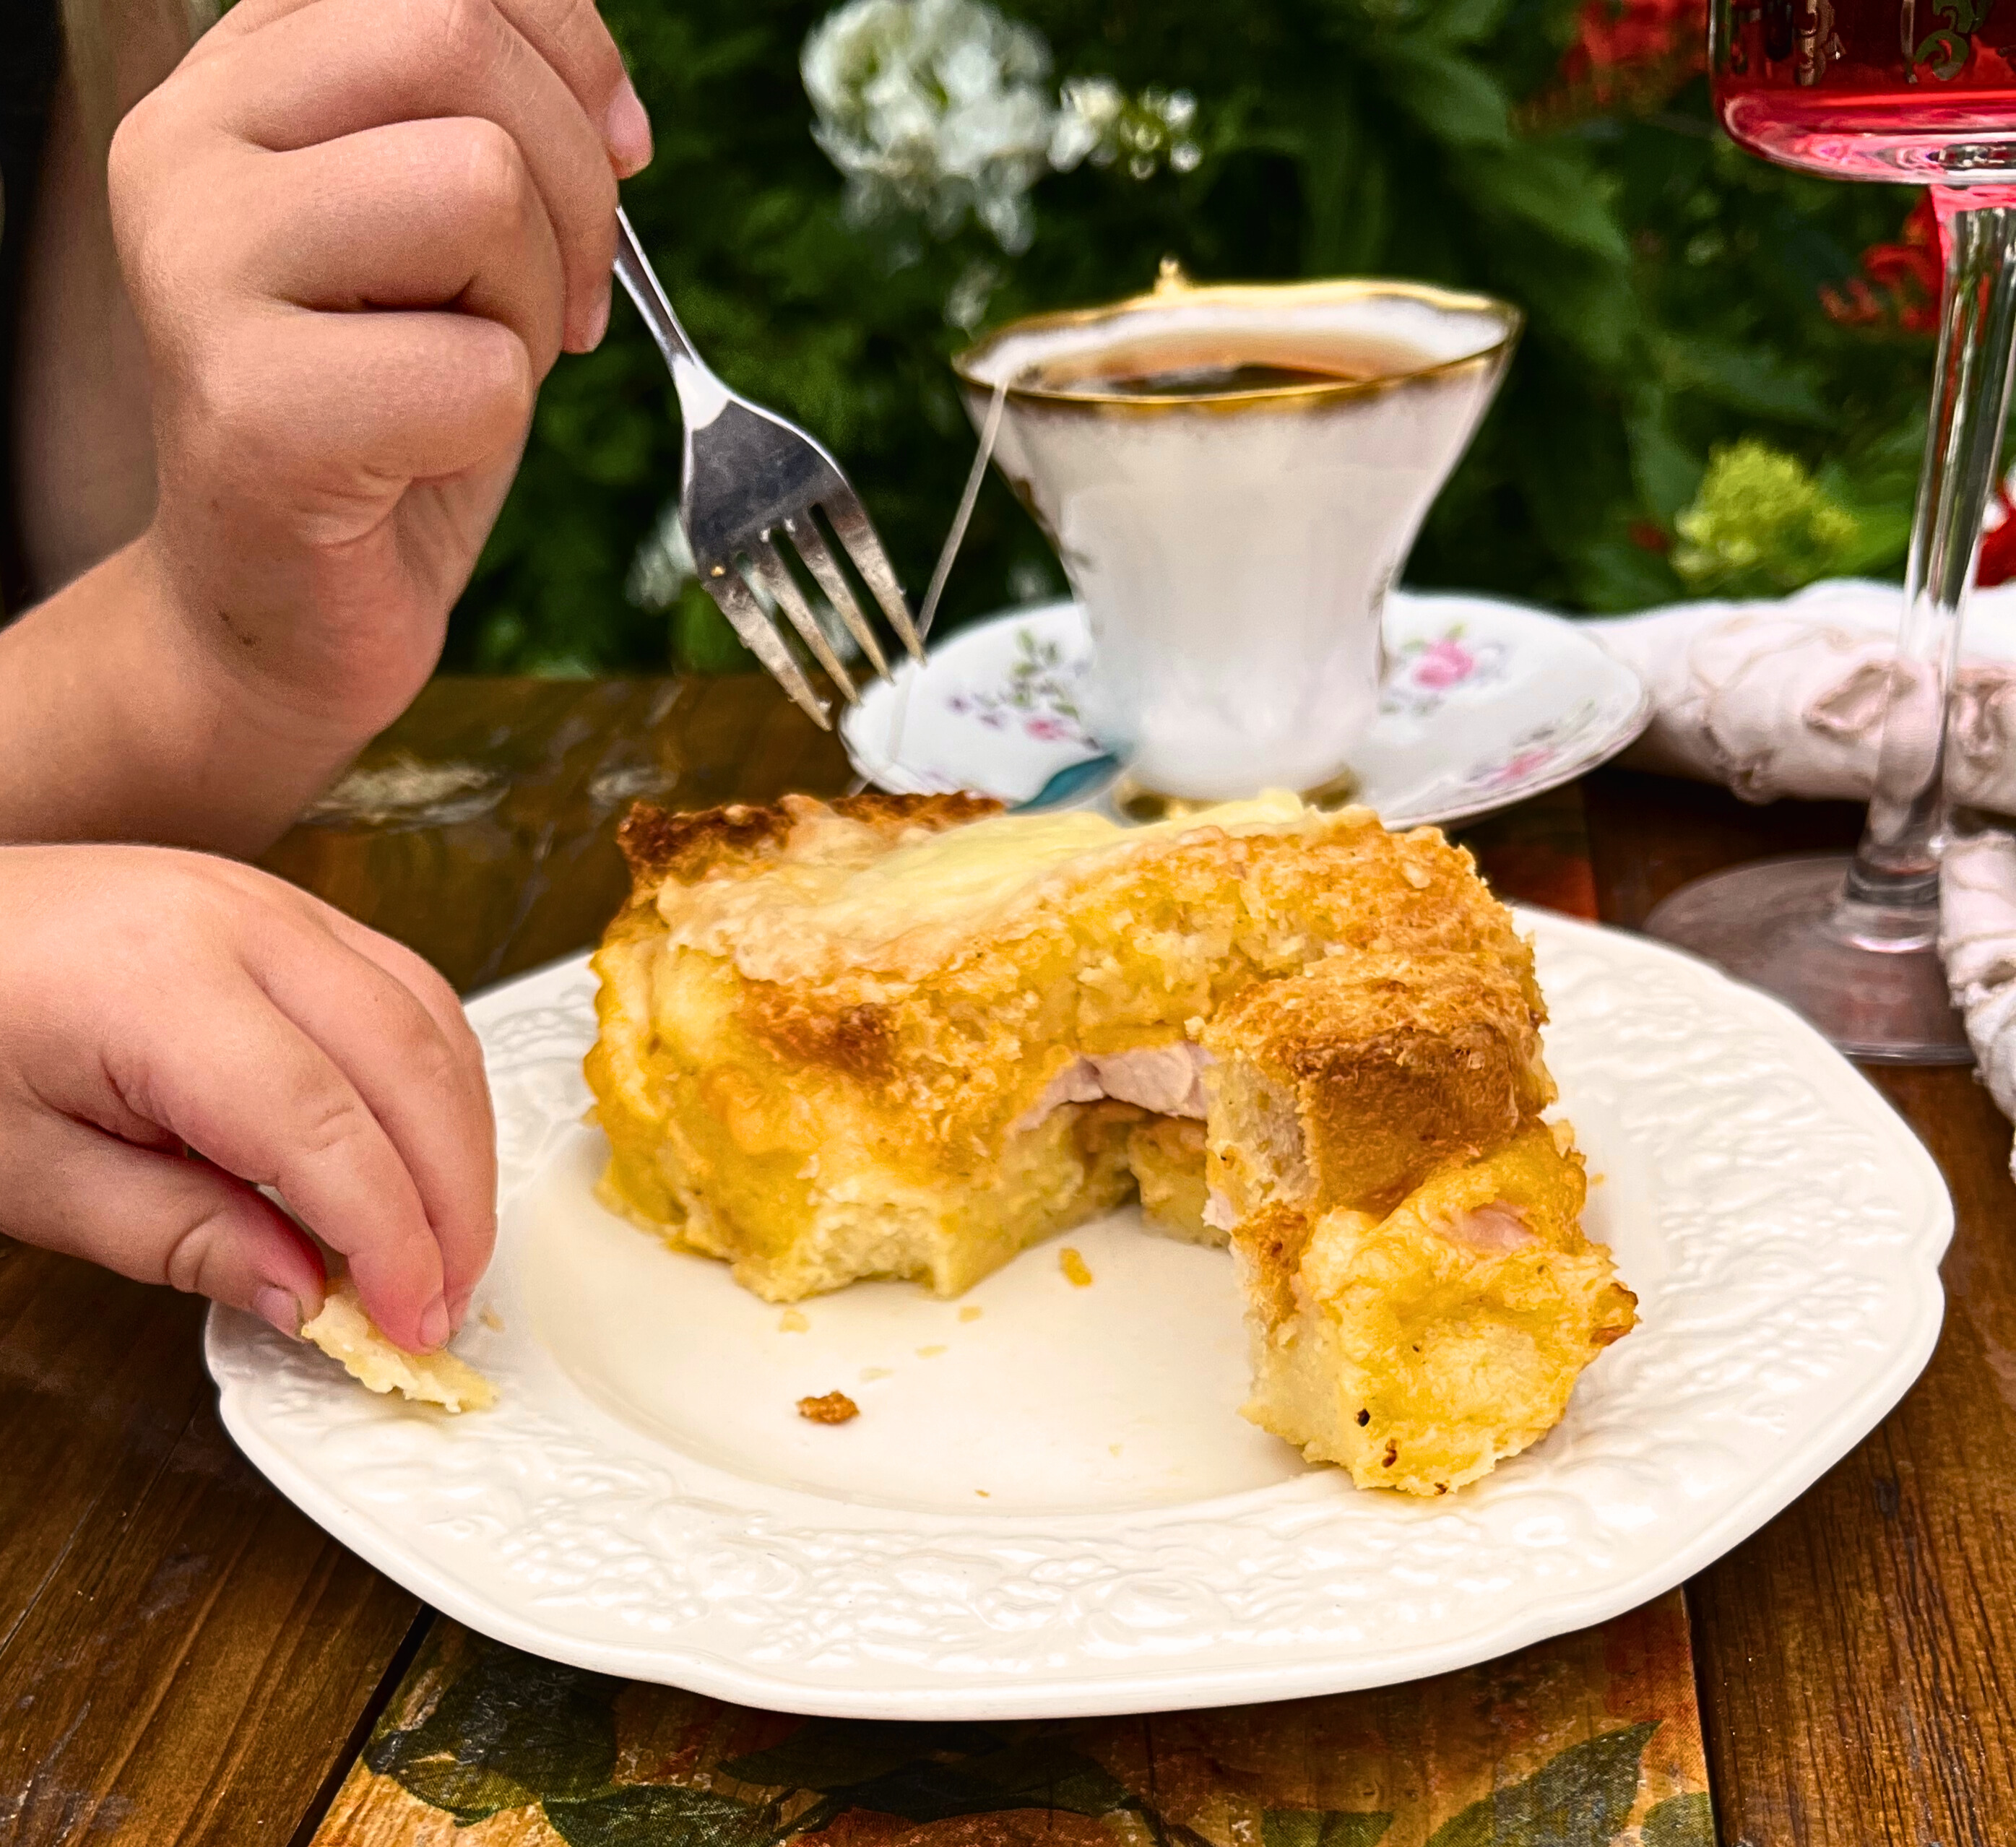 Outdoor table with make ahead breakfast strata on a white plate with a cup of tea in the background and two children's hands eating it.